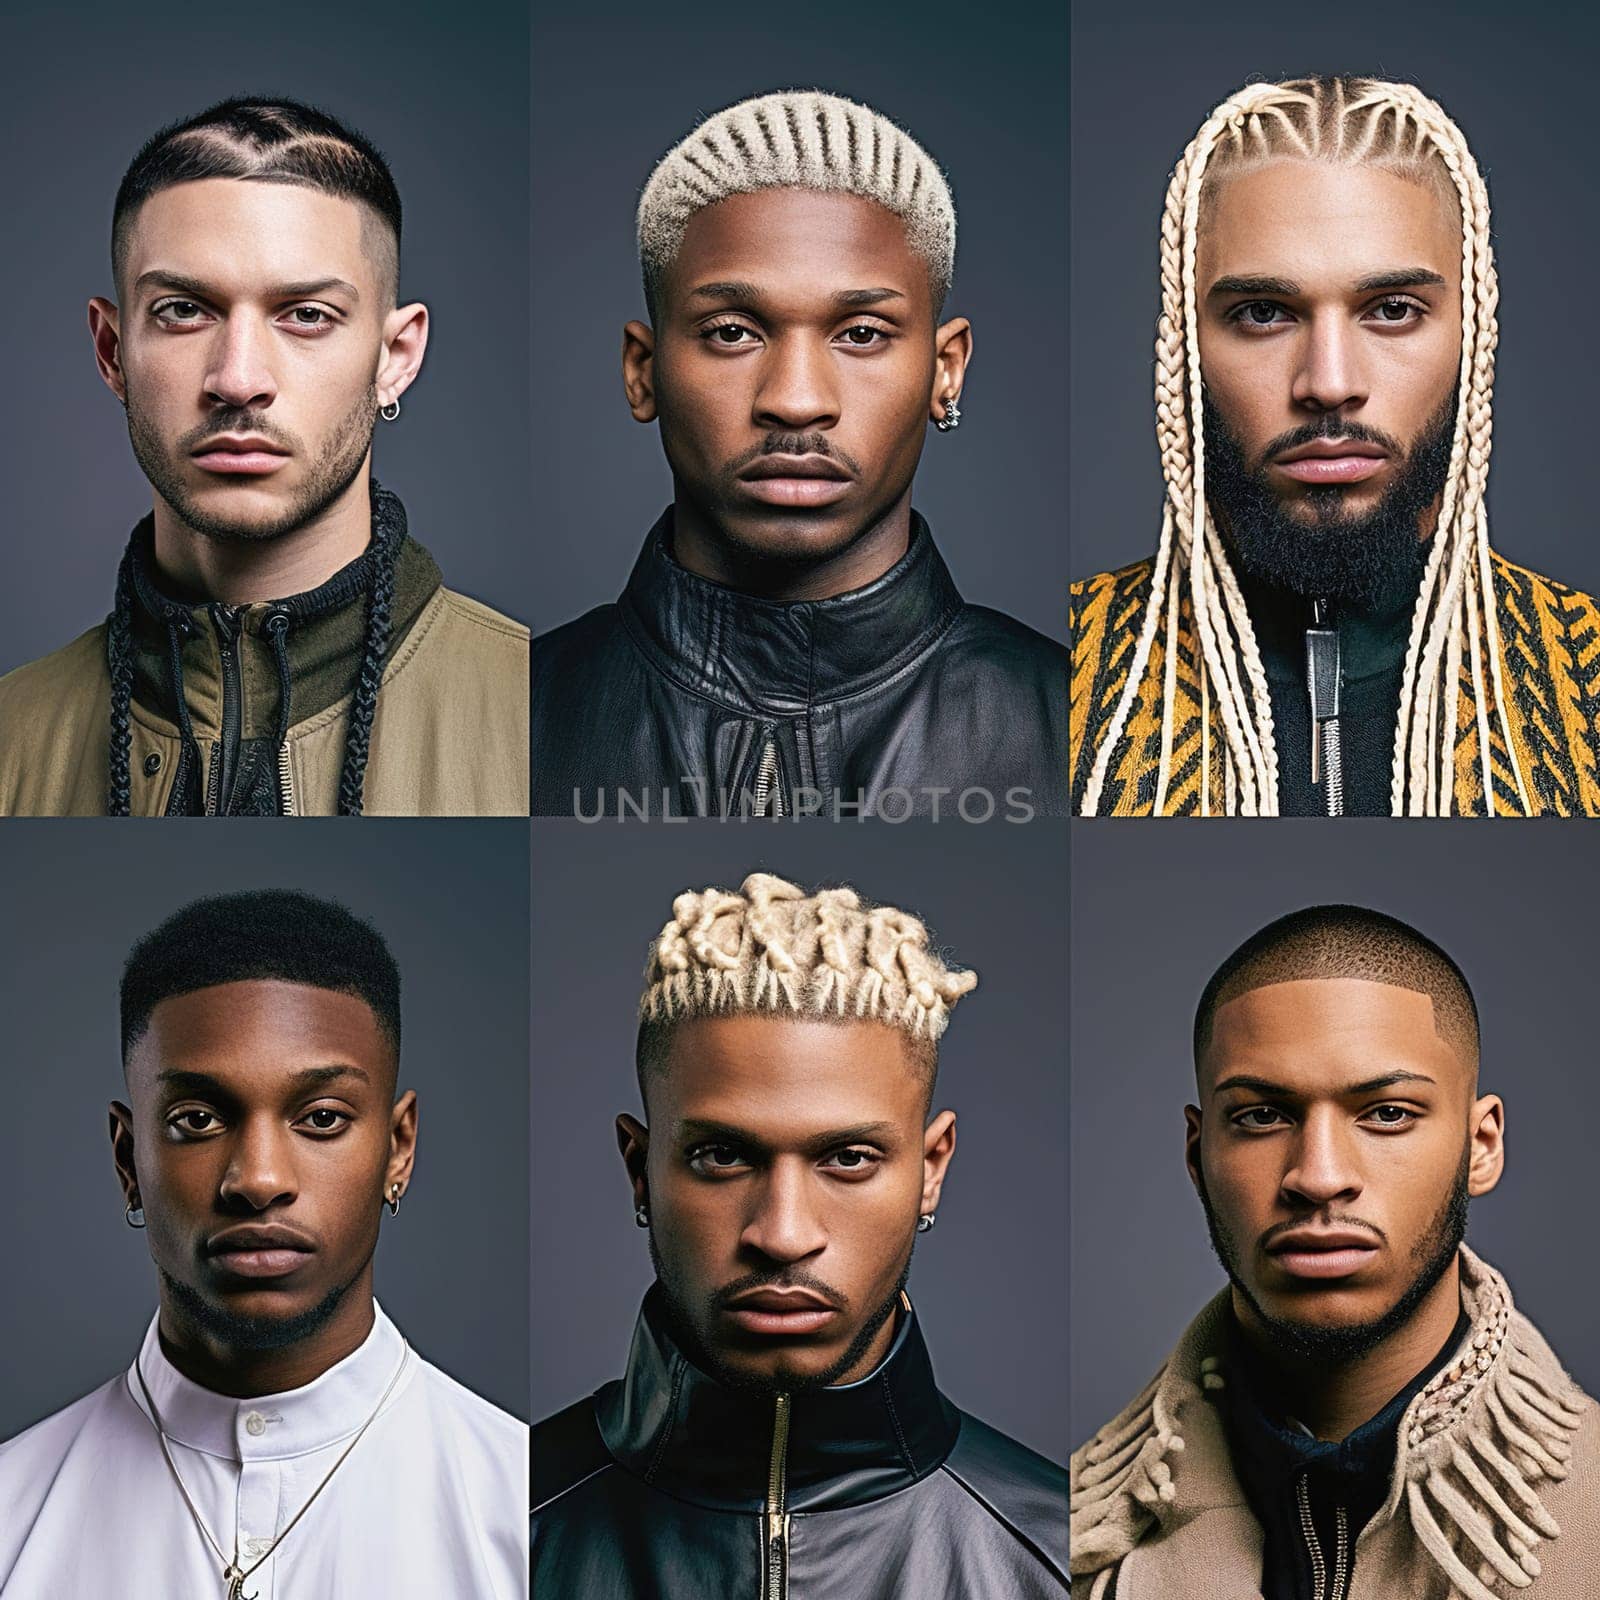 Stylish dreadlock hairstyles from the African American men's catalog. High quality photo